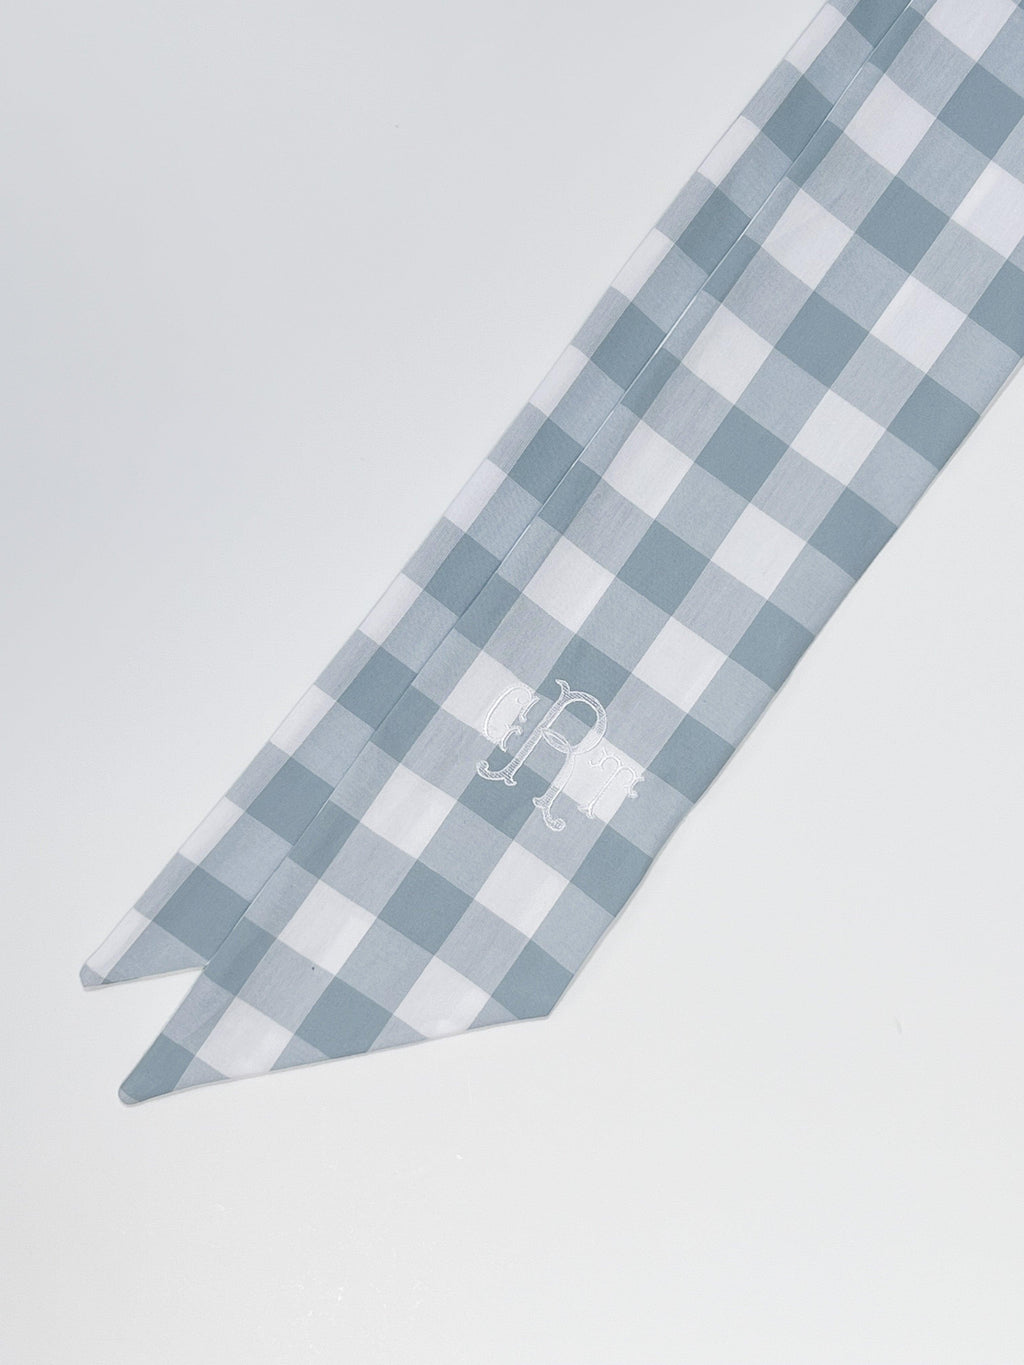 Swaddle Bow - Grayson Check | Nashville Bow Co. - Classic Hair Bows, Bow Ties, Basket Bows, Pacifier Clips, Wreath Sashes, Swaddle Bows. Classic Southern Charm.